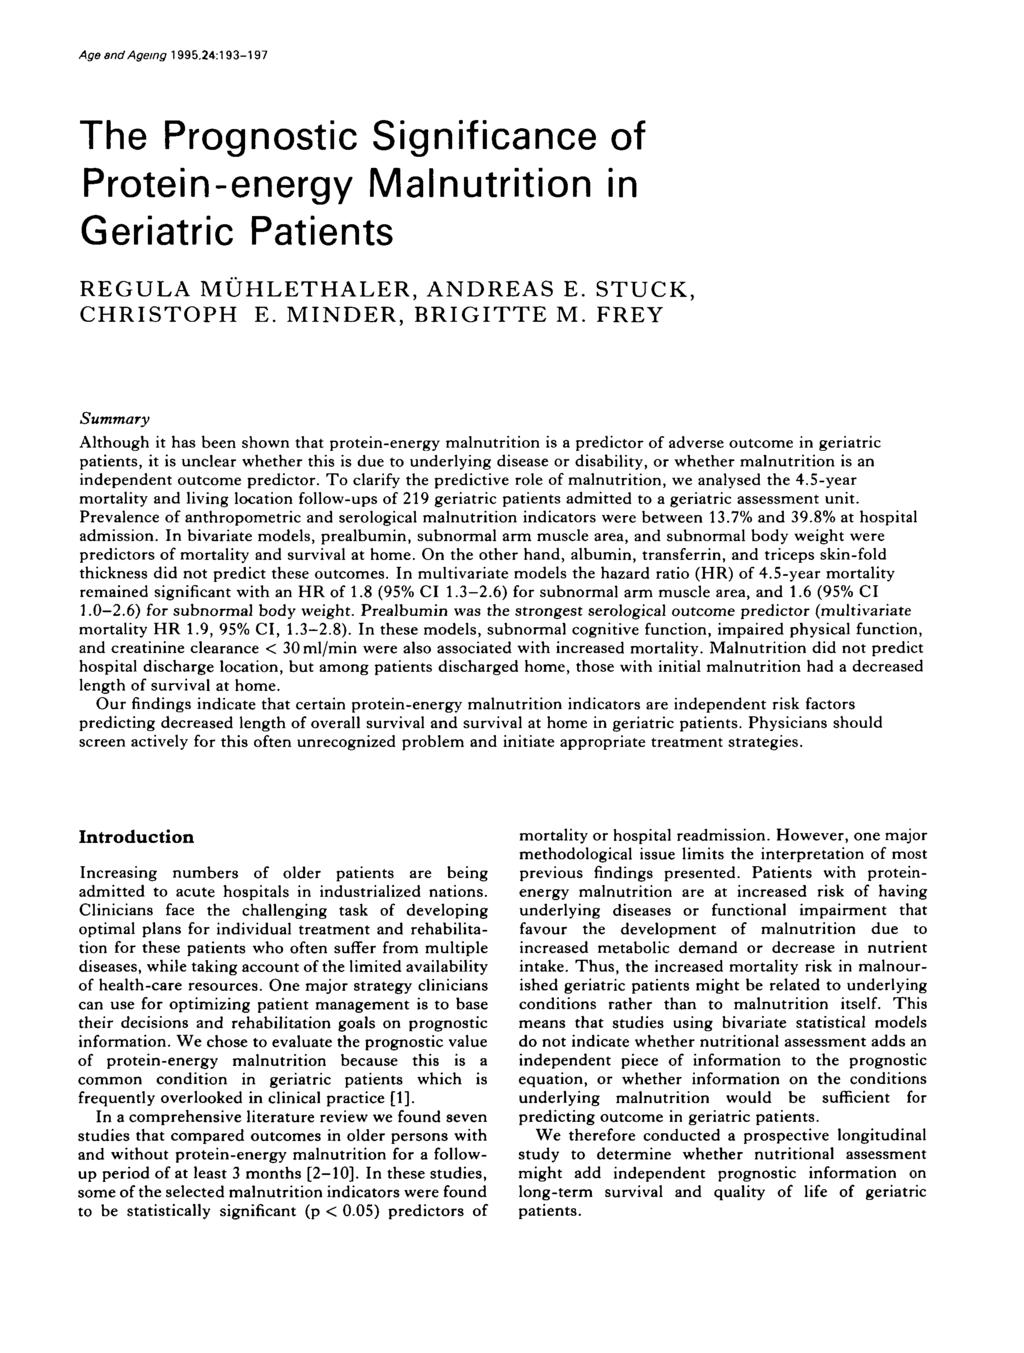 Age and Ageing 1995.24:193-197 The Prognostic Significance of Protein-energy Malnutrition in Geriatric Patients REGULA MUHLETHALER, ANDREAS E. STUCK, CHRISTOPH E. MINDER, BRIGITTE M.